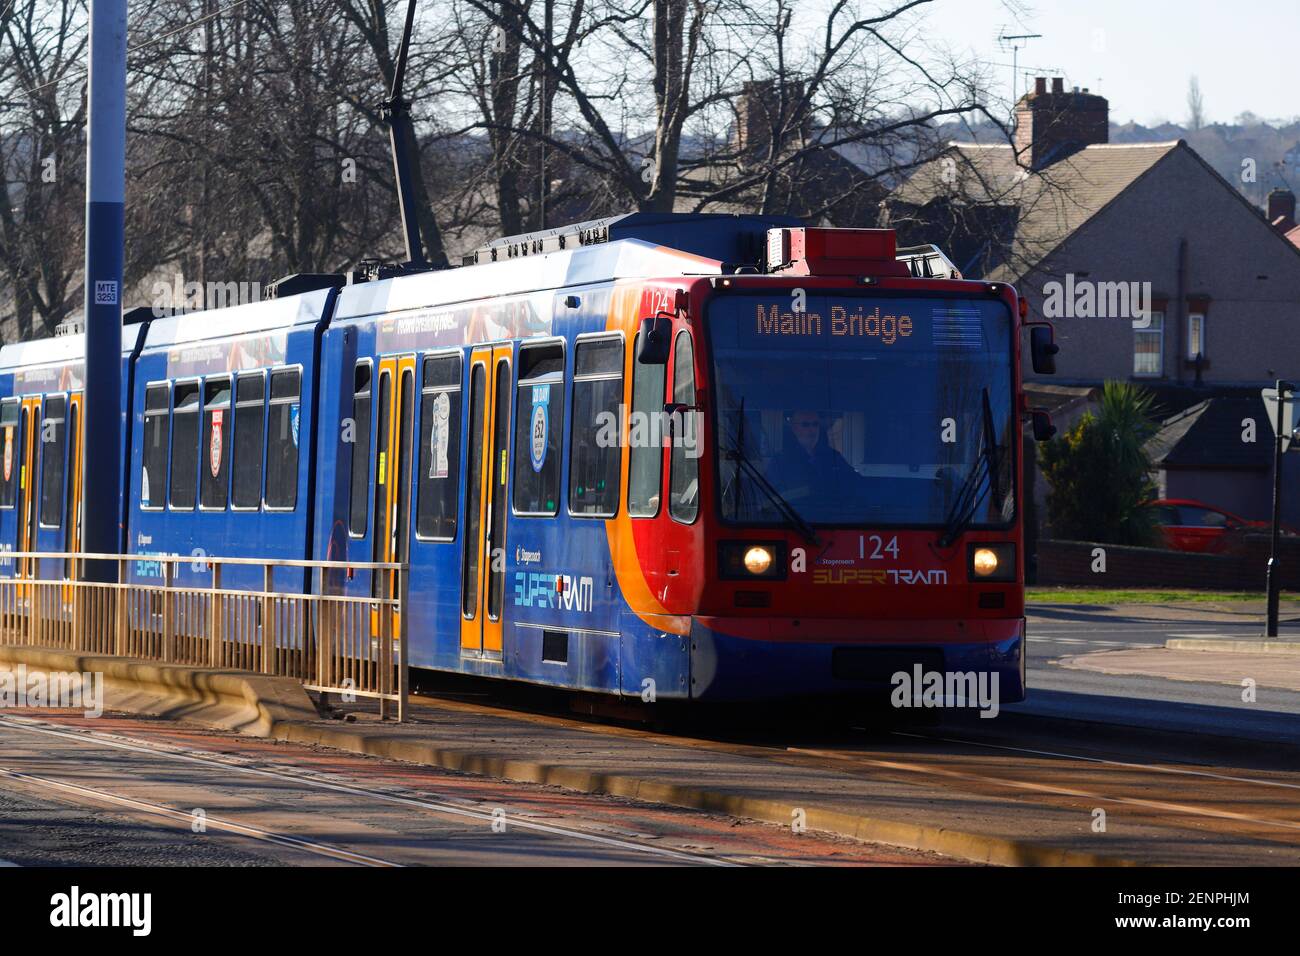 Super tram operating in Sheffield, South Yorkshire,UK Stock Photo